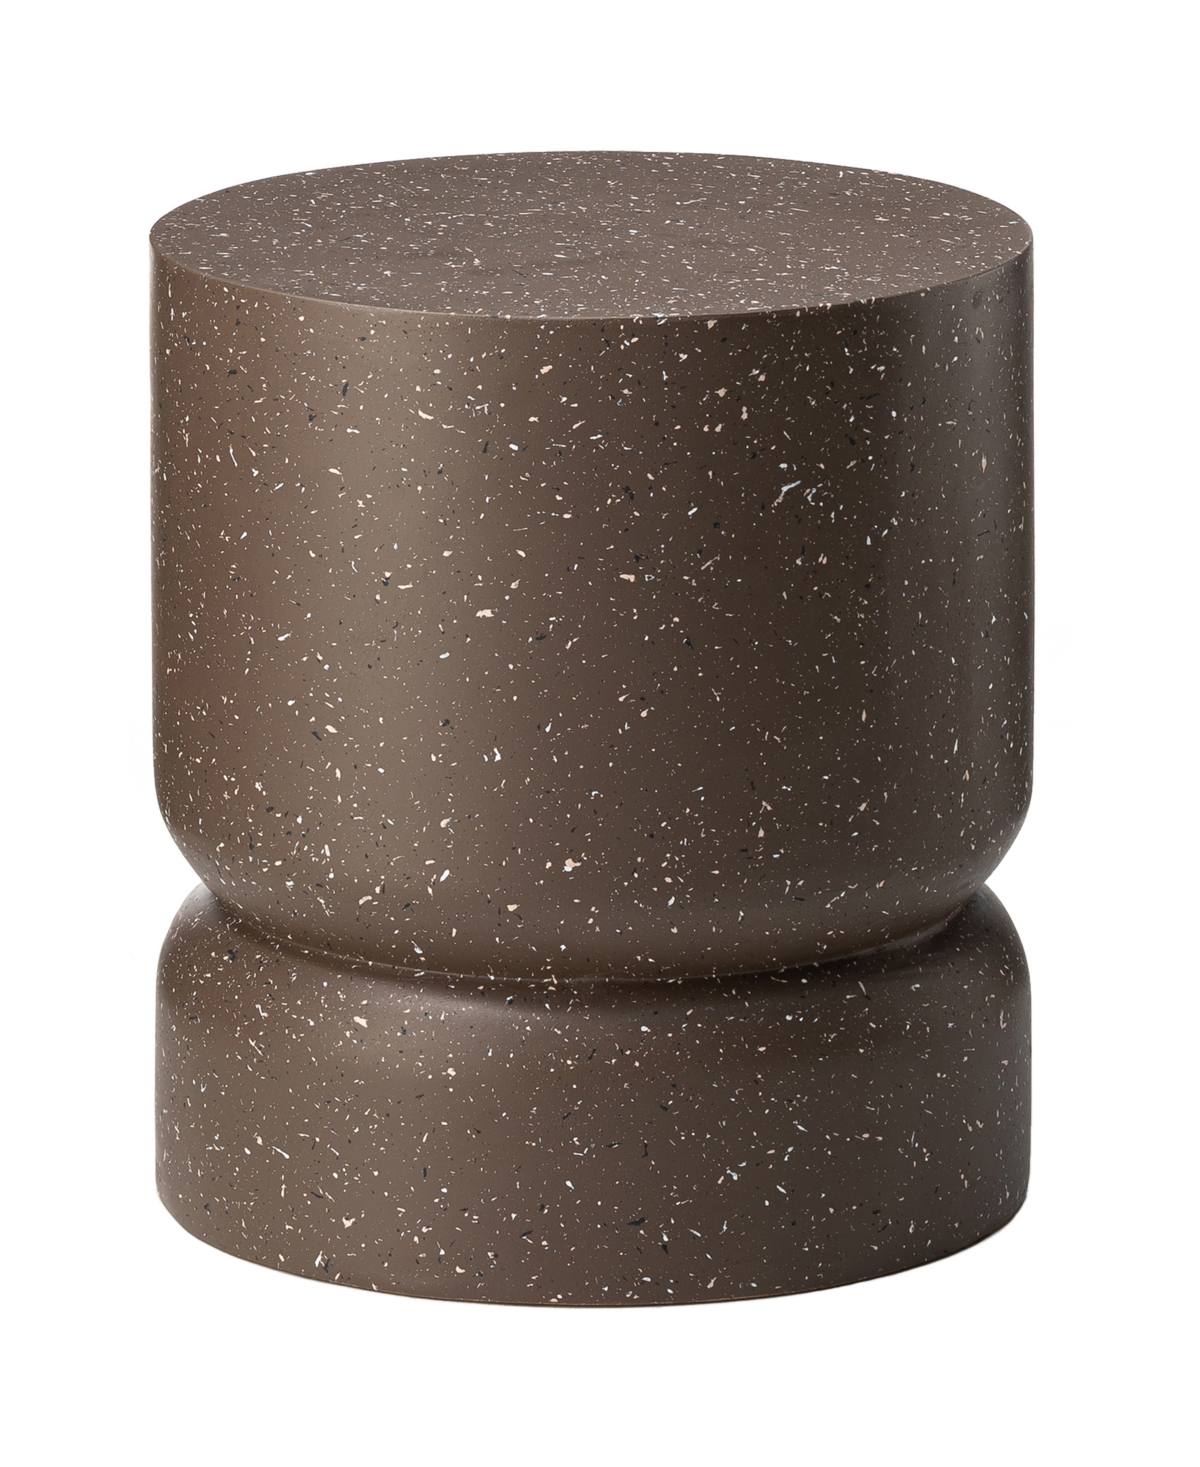 Multi-functional Faux Terrazzo Garden Stool or Planter Stand - Brown